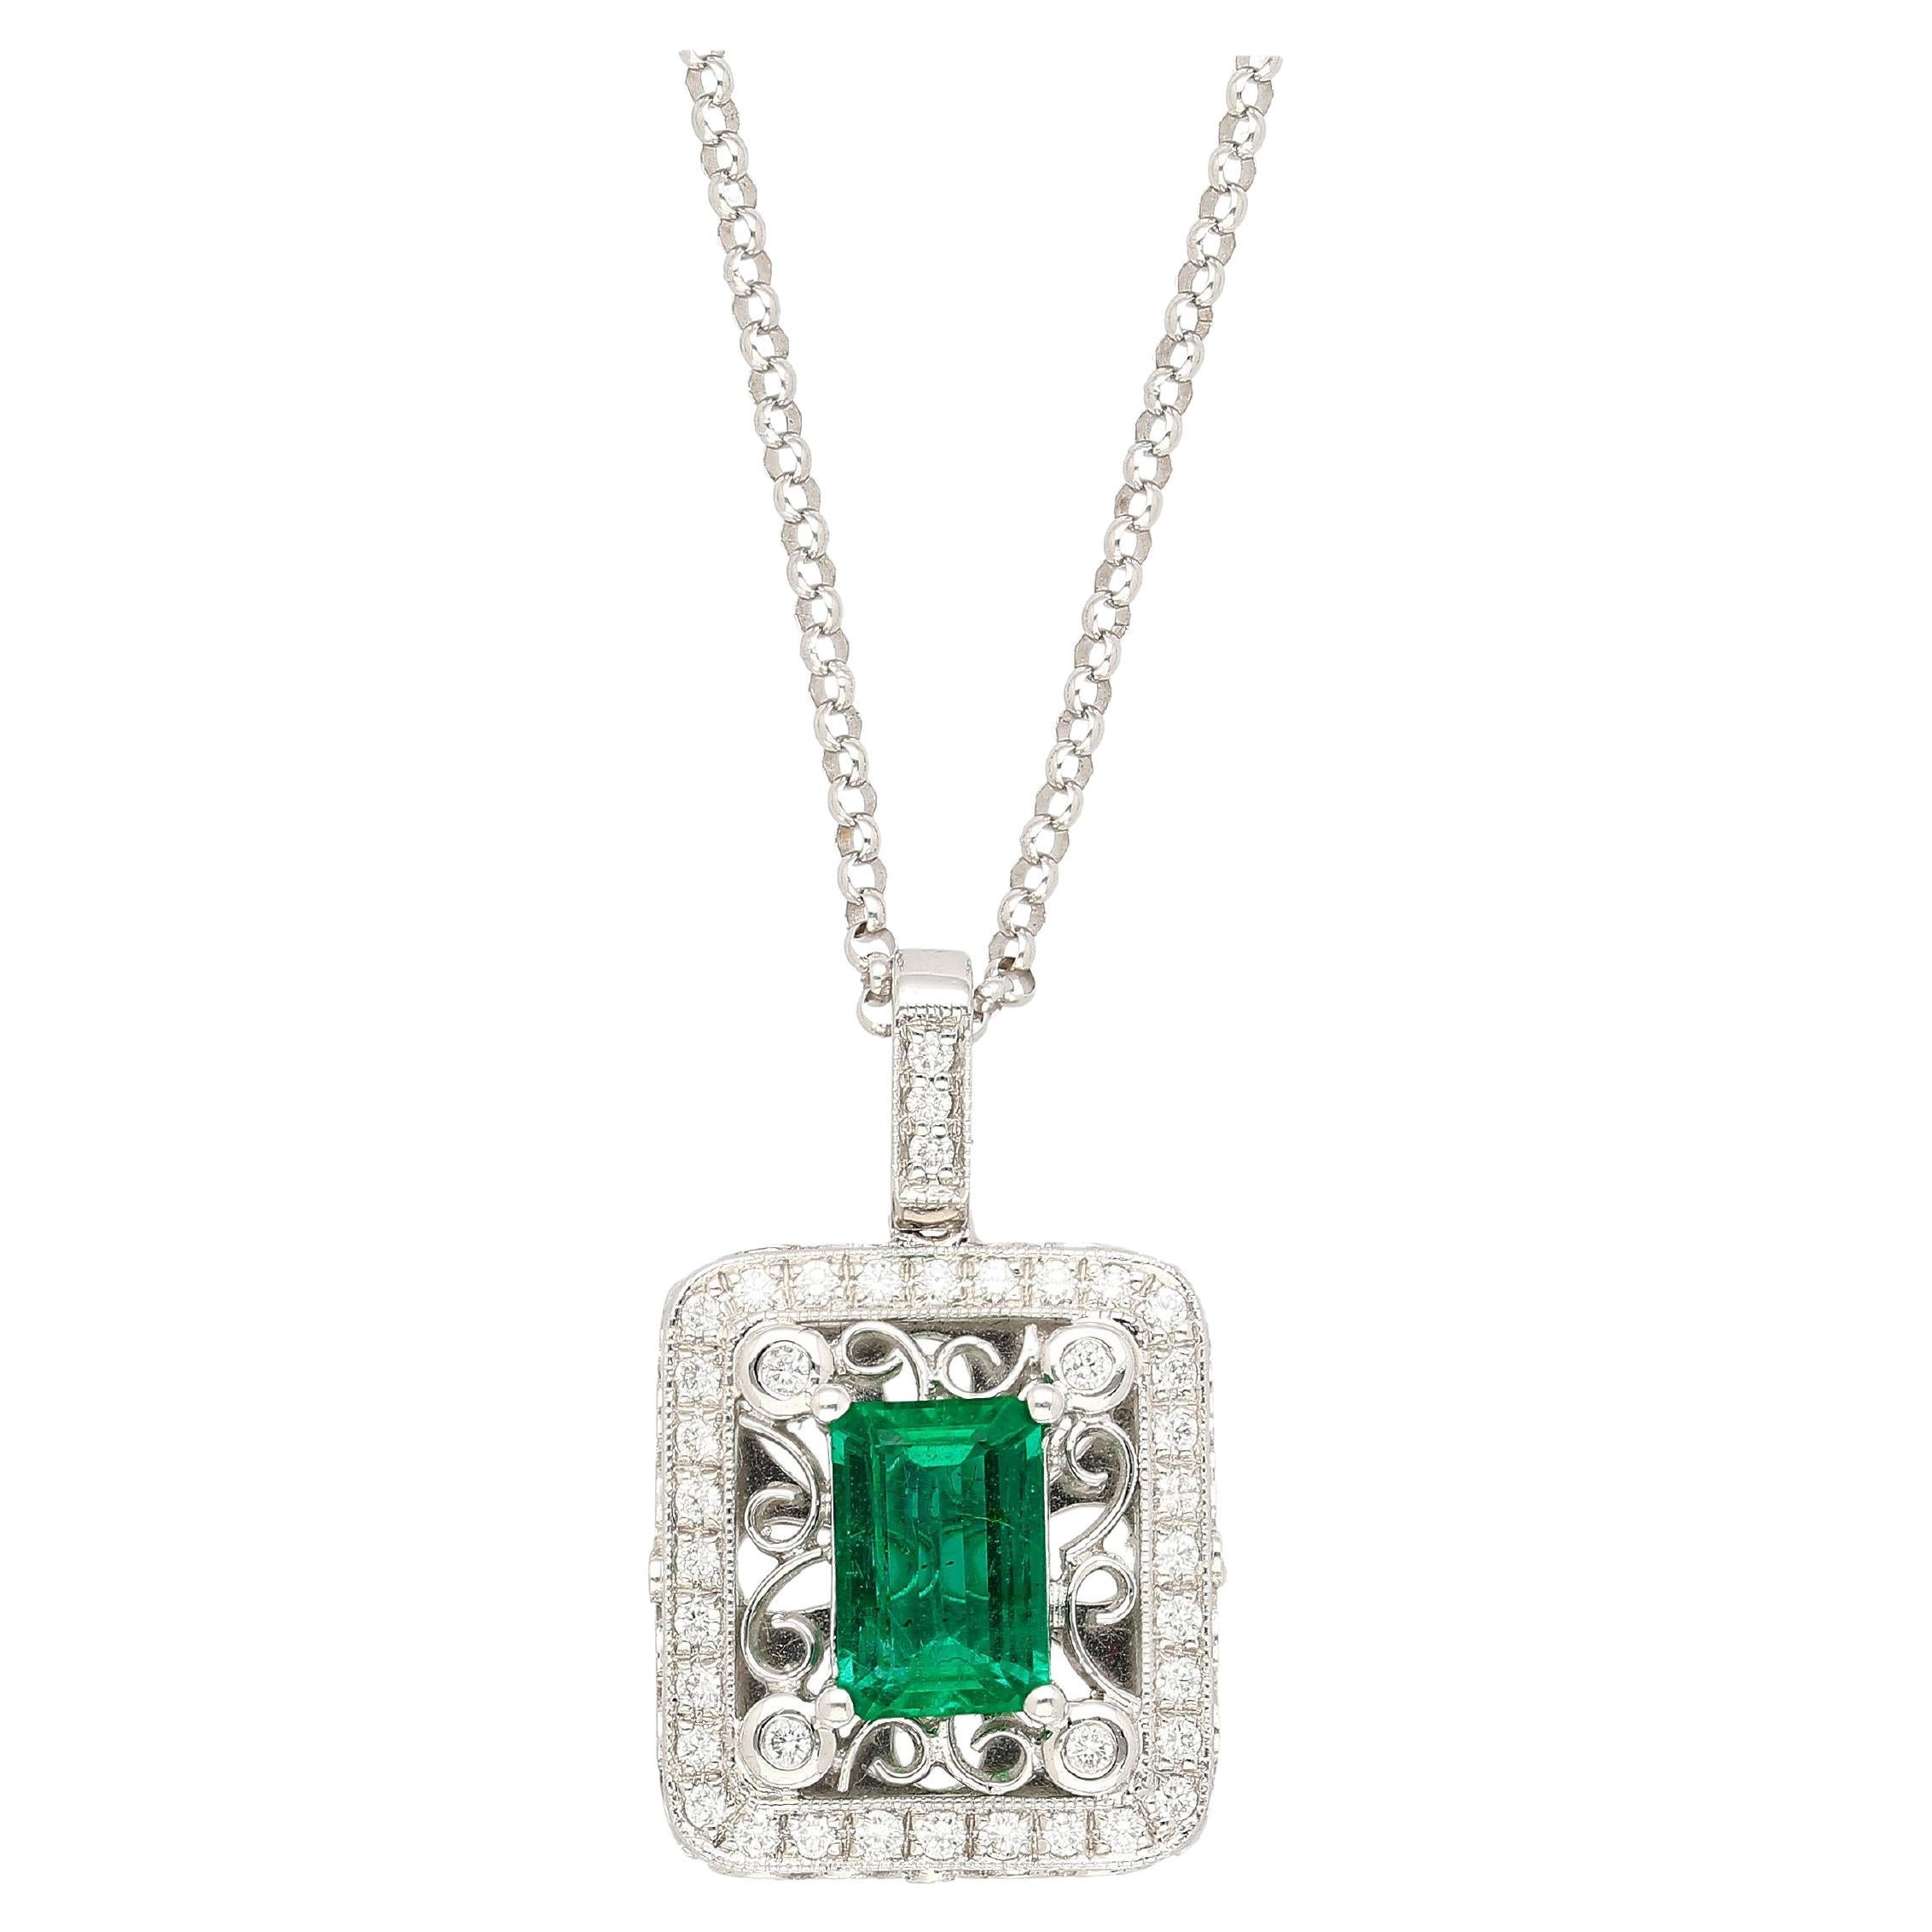 GIA Certified 1.39 Carat Zambian Emerald and Diamond Floral Box Pendant Necklace For Sale